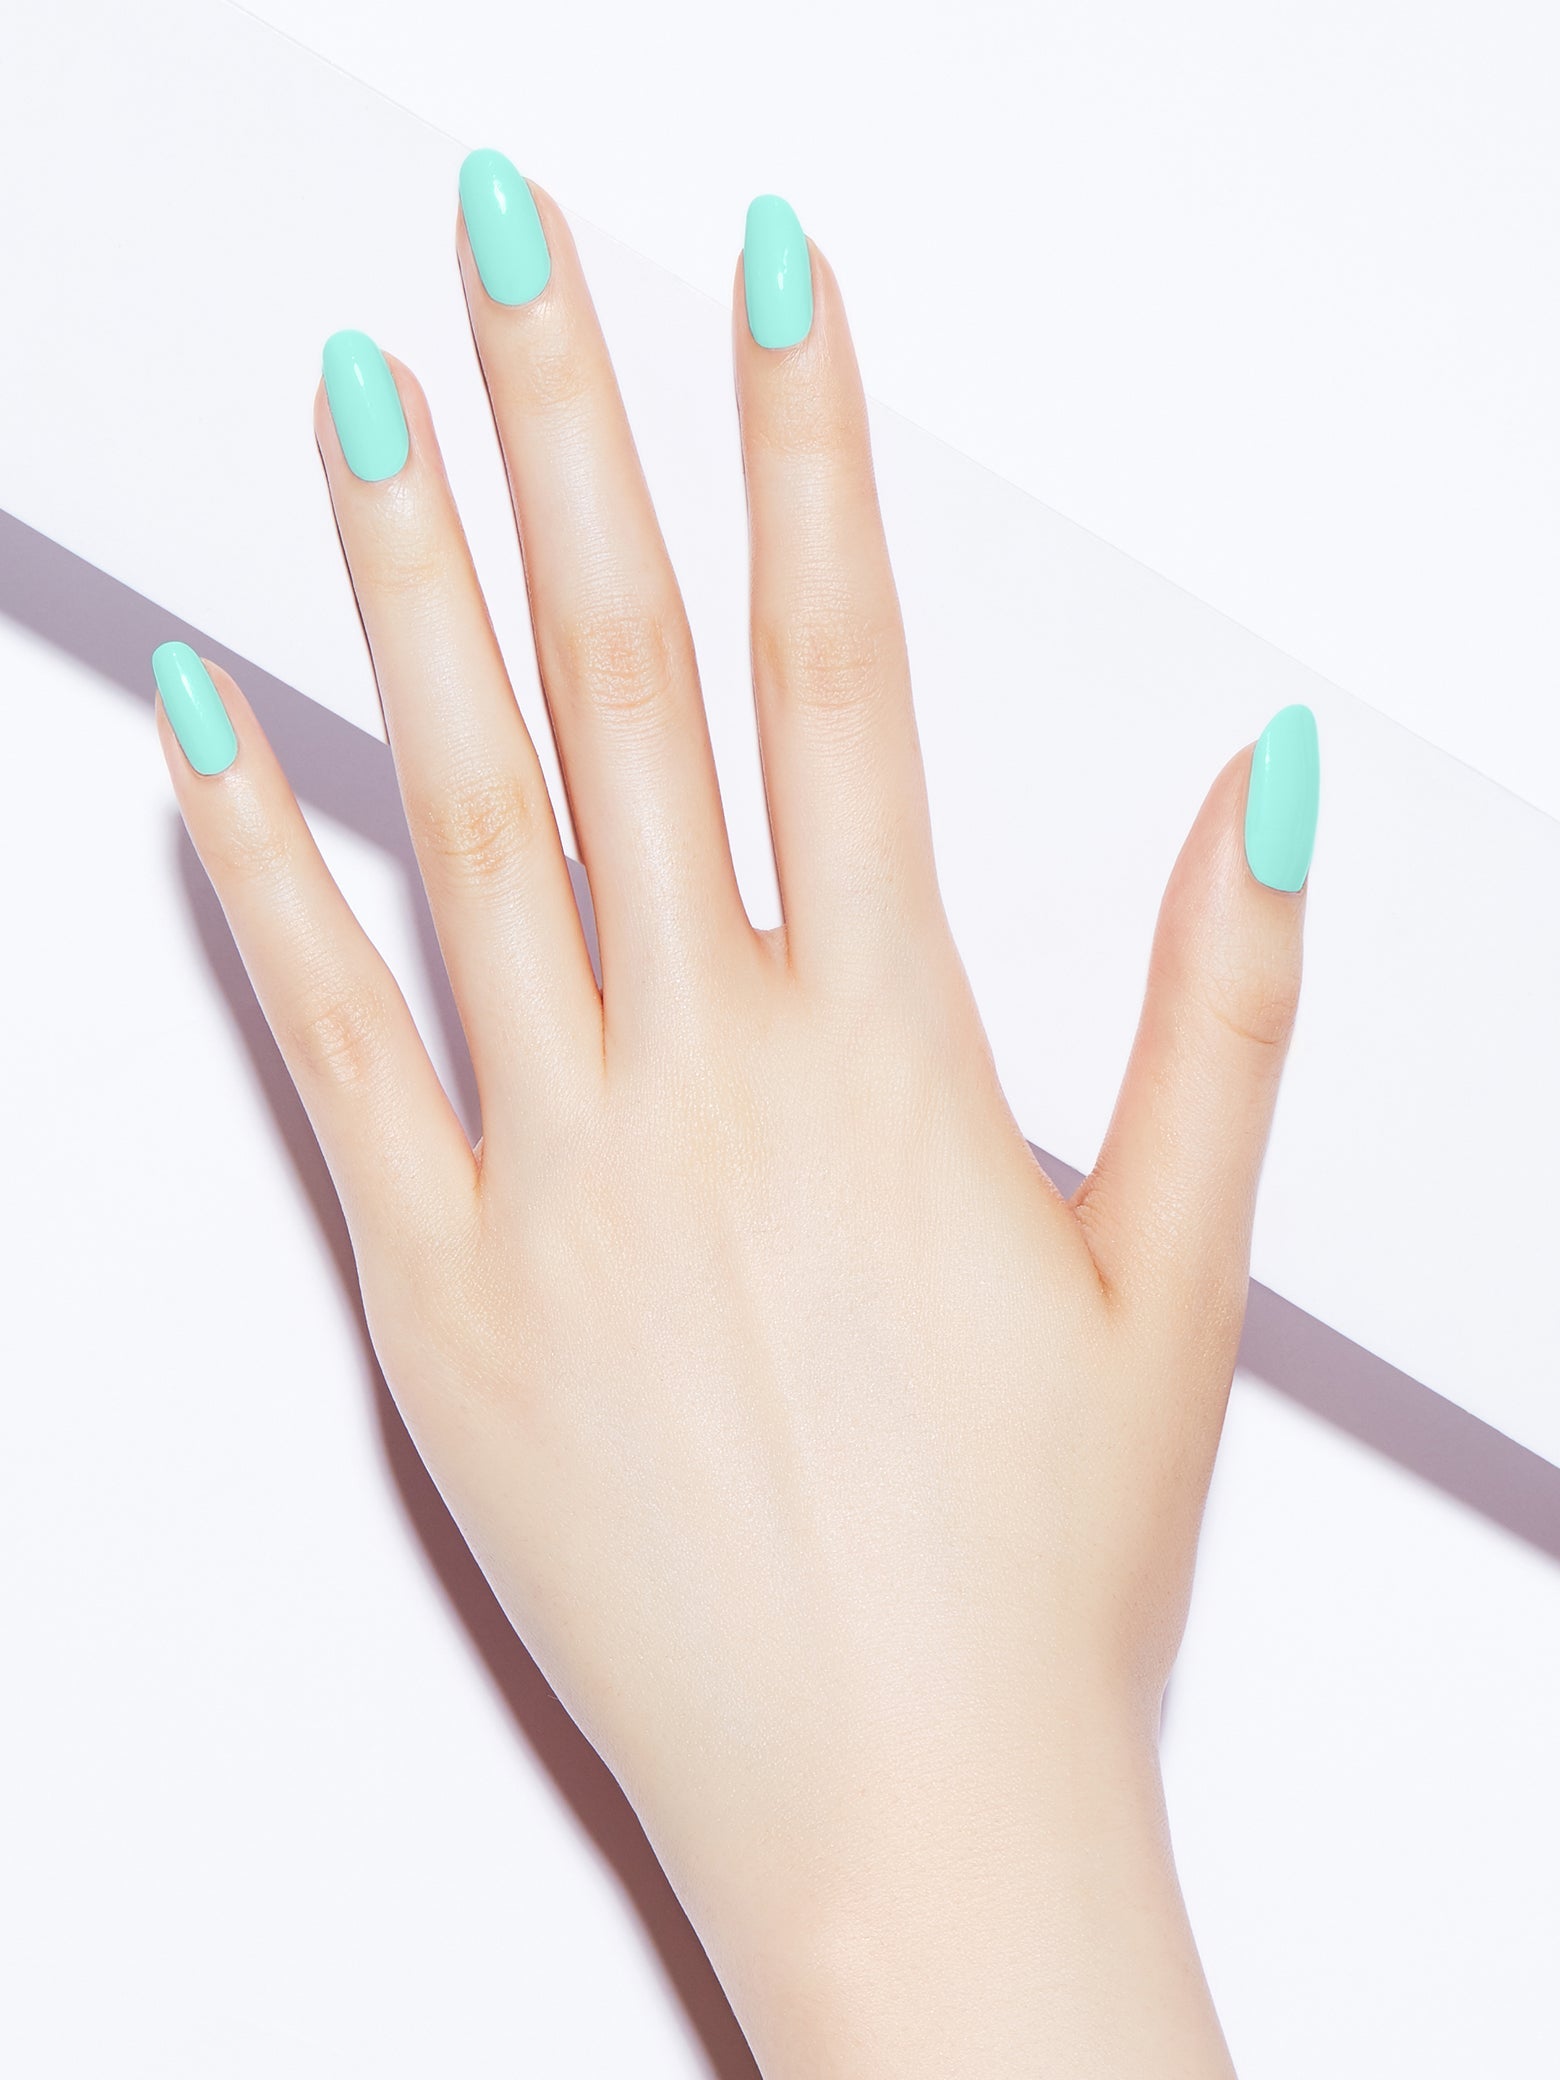 Bright mint with blue/green undertones, Full coverage, Light